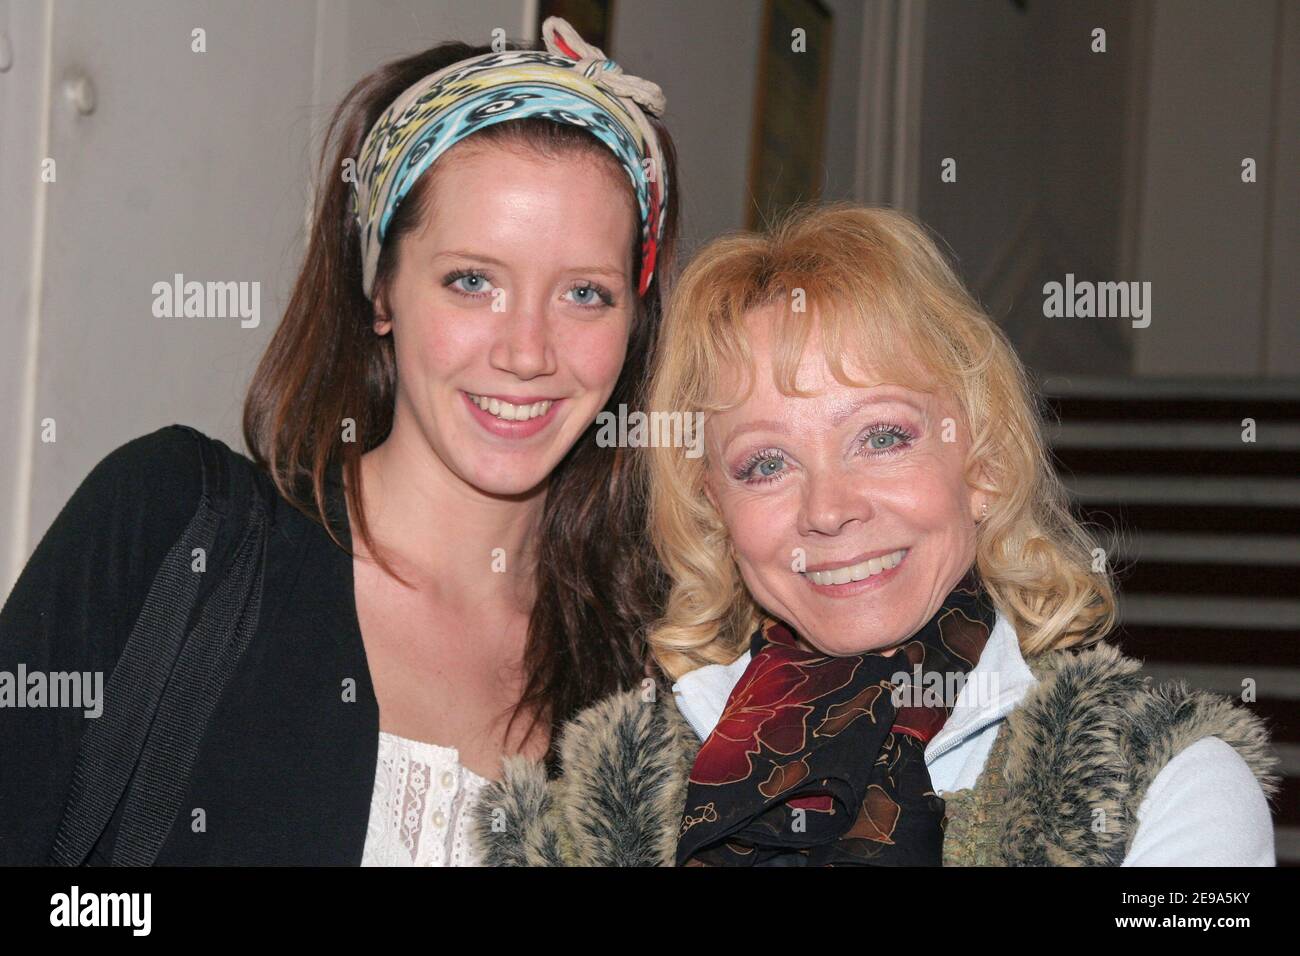 EXCLUSIVE. French actress Sara Giraudeau, (Bernard Giraudeau's daughter), poses with Isabelle Aubret after their show 'Le Monologues du Vagin' at the Theatre de Paris, Paris, France, on May 7, 2006. Photo by Denis Guignebourg/ABACAPRESS.COM Stock Photo